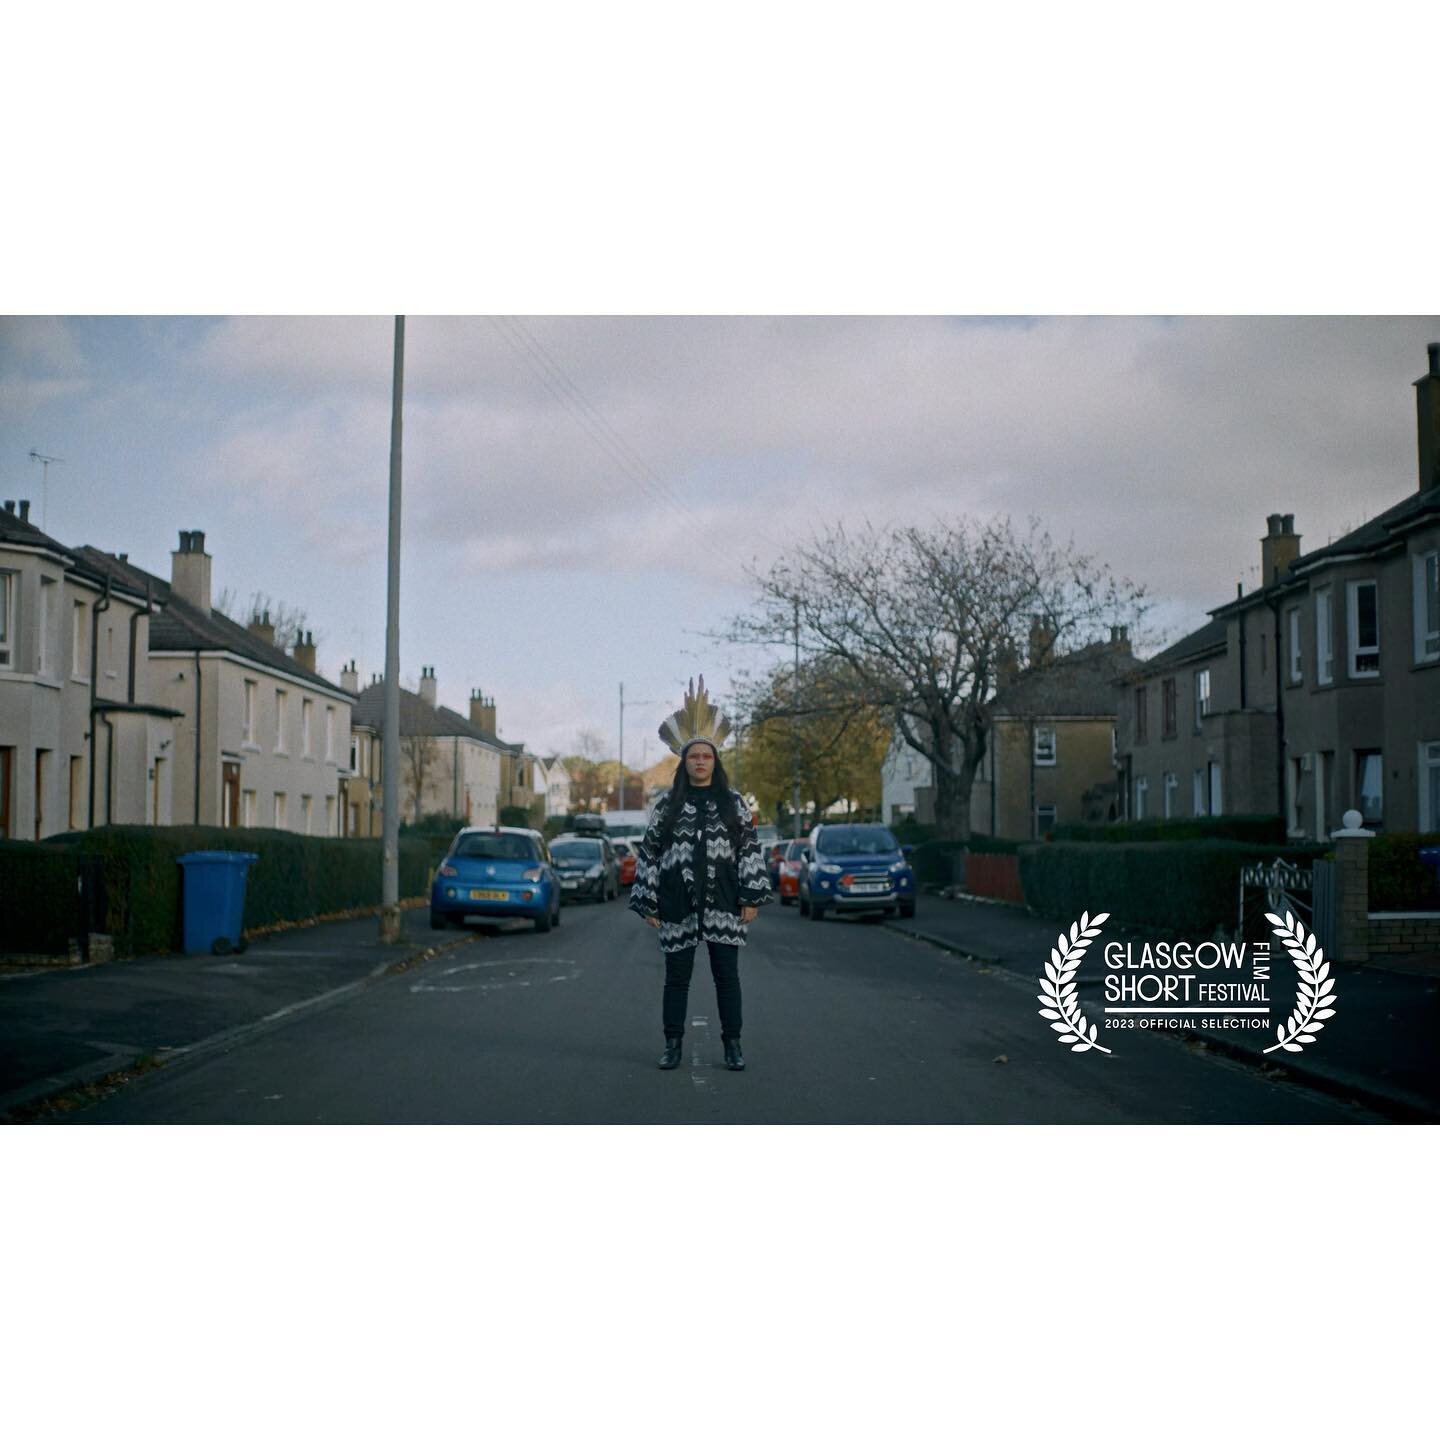 The Ghost Rainforest is coming home to Glasgow with its Scottish premiere @glasgowshort this weekend. You can hear me talking about the film on @BBCradioscot - link in bio. Thanks to Glasgow Short Film Festival and to the BBC for their coverage of th